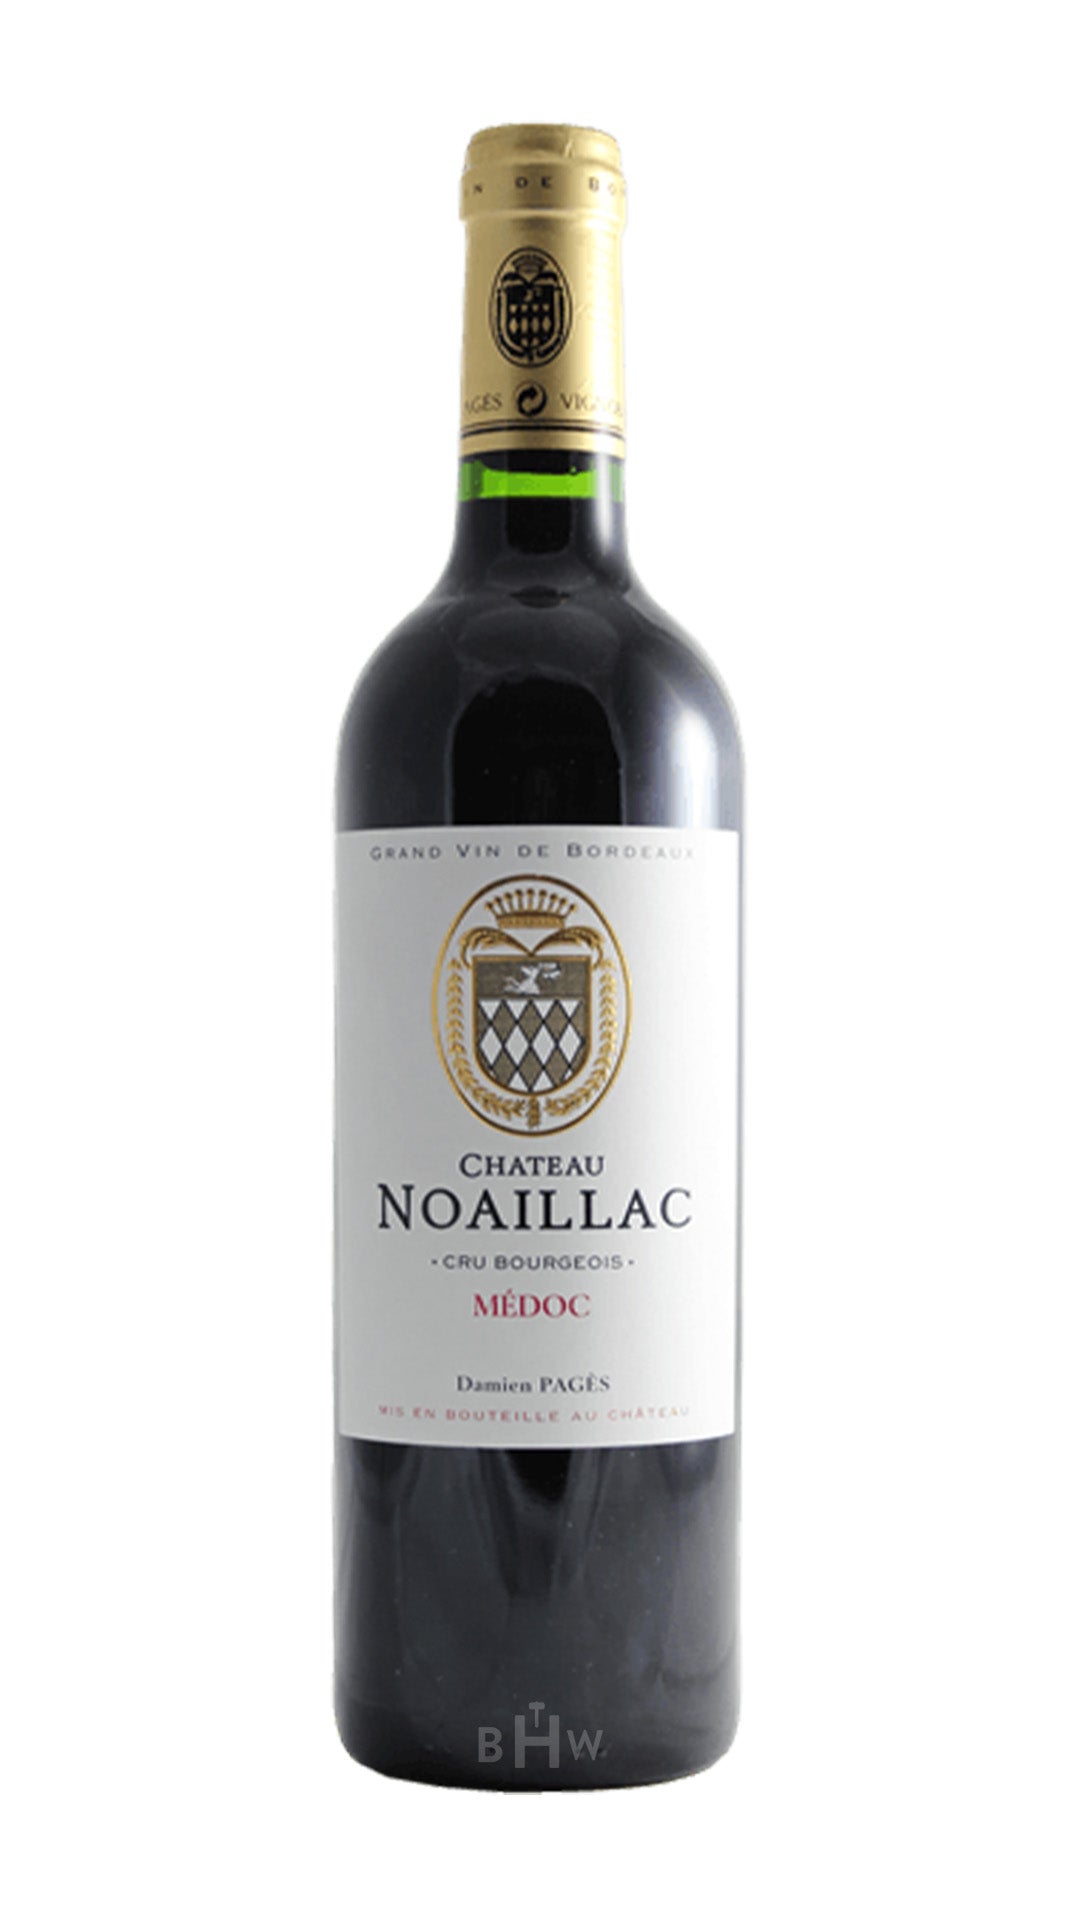 Chateau Cru Noaillac Medoc 2018 Superieur Bourgeois